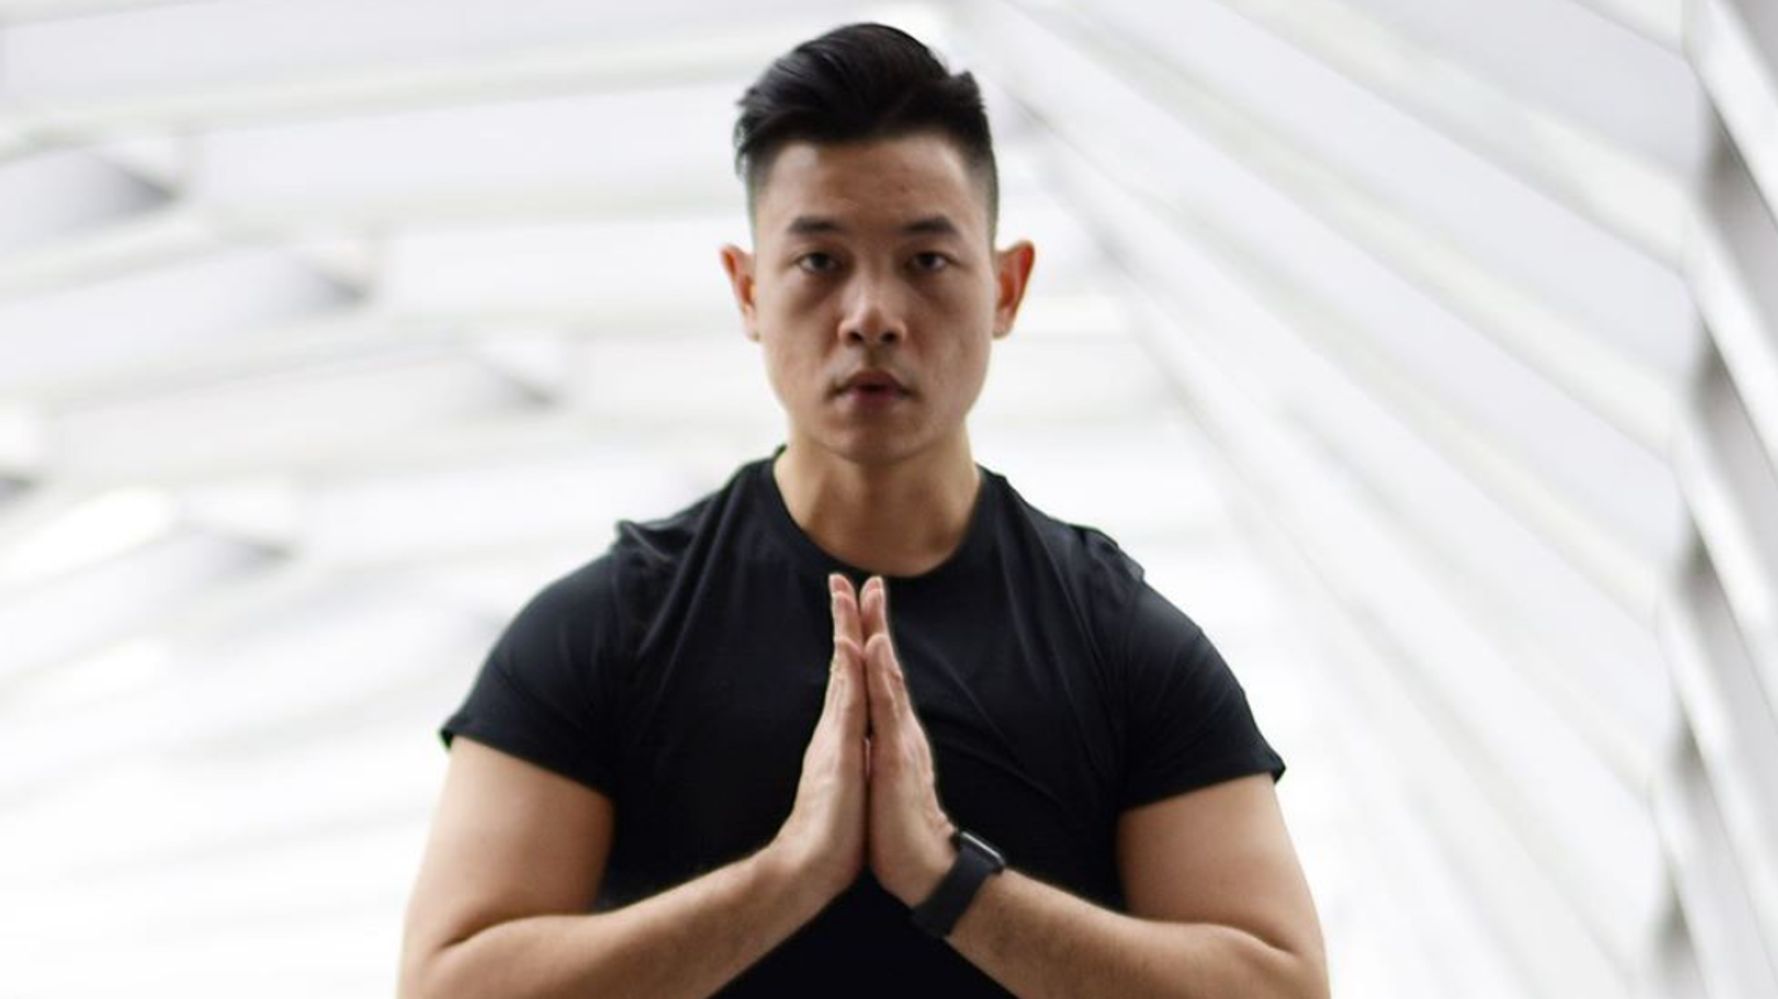 A Prominent Yogi on Fat Yoga, Instagram, and Changing Stereotypes